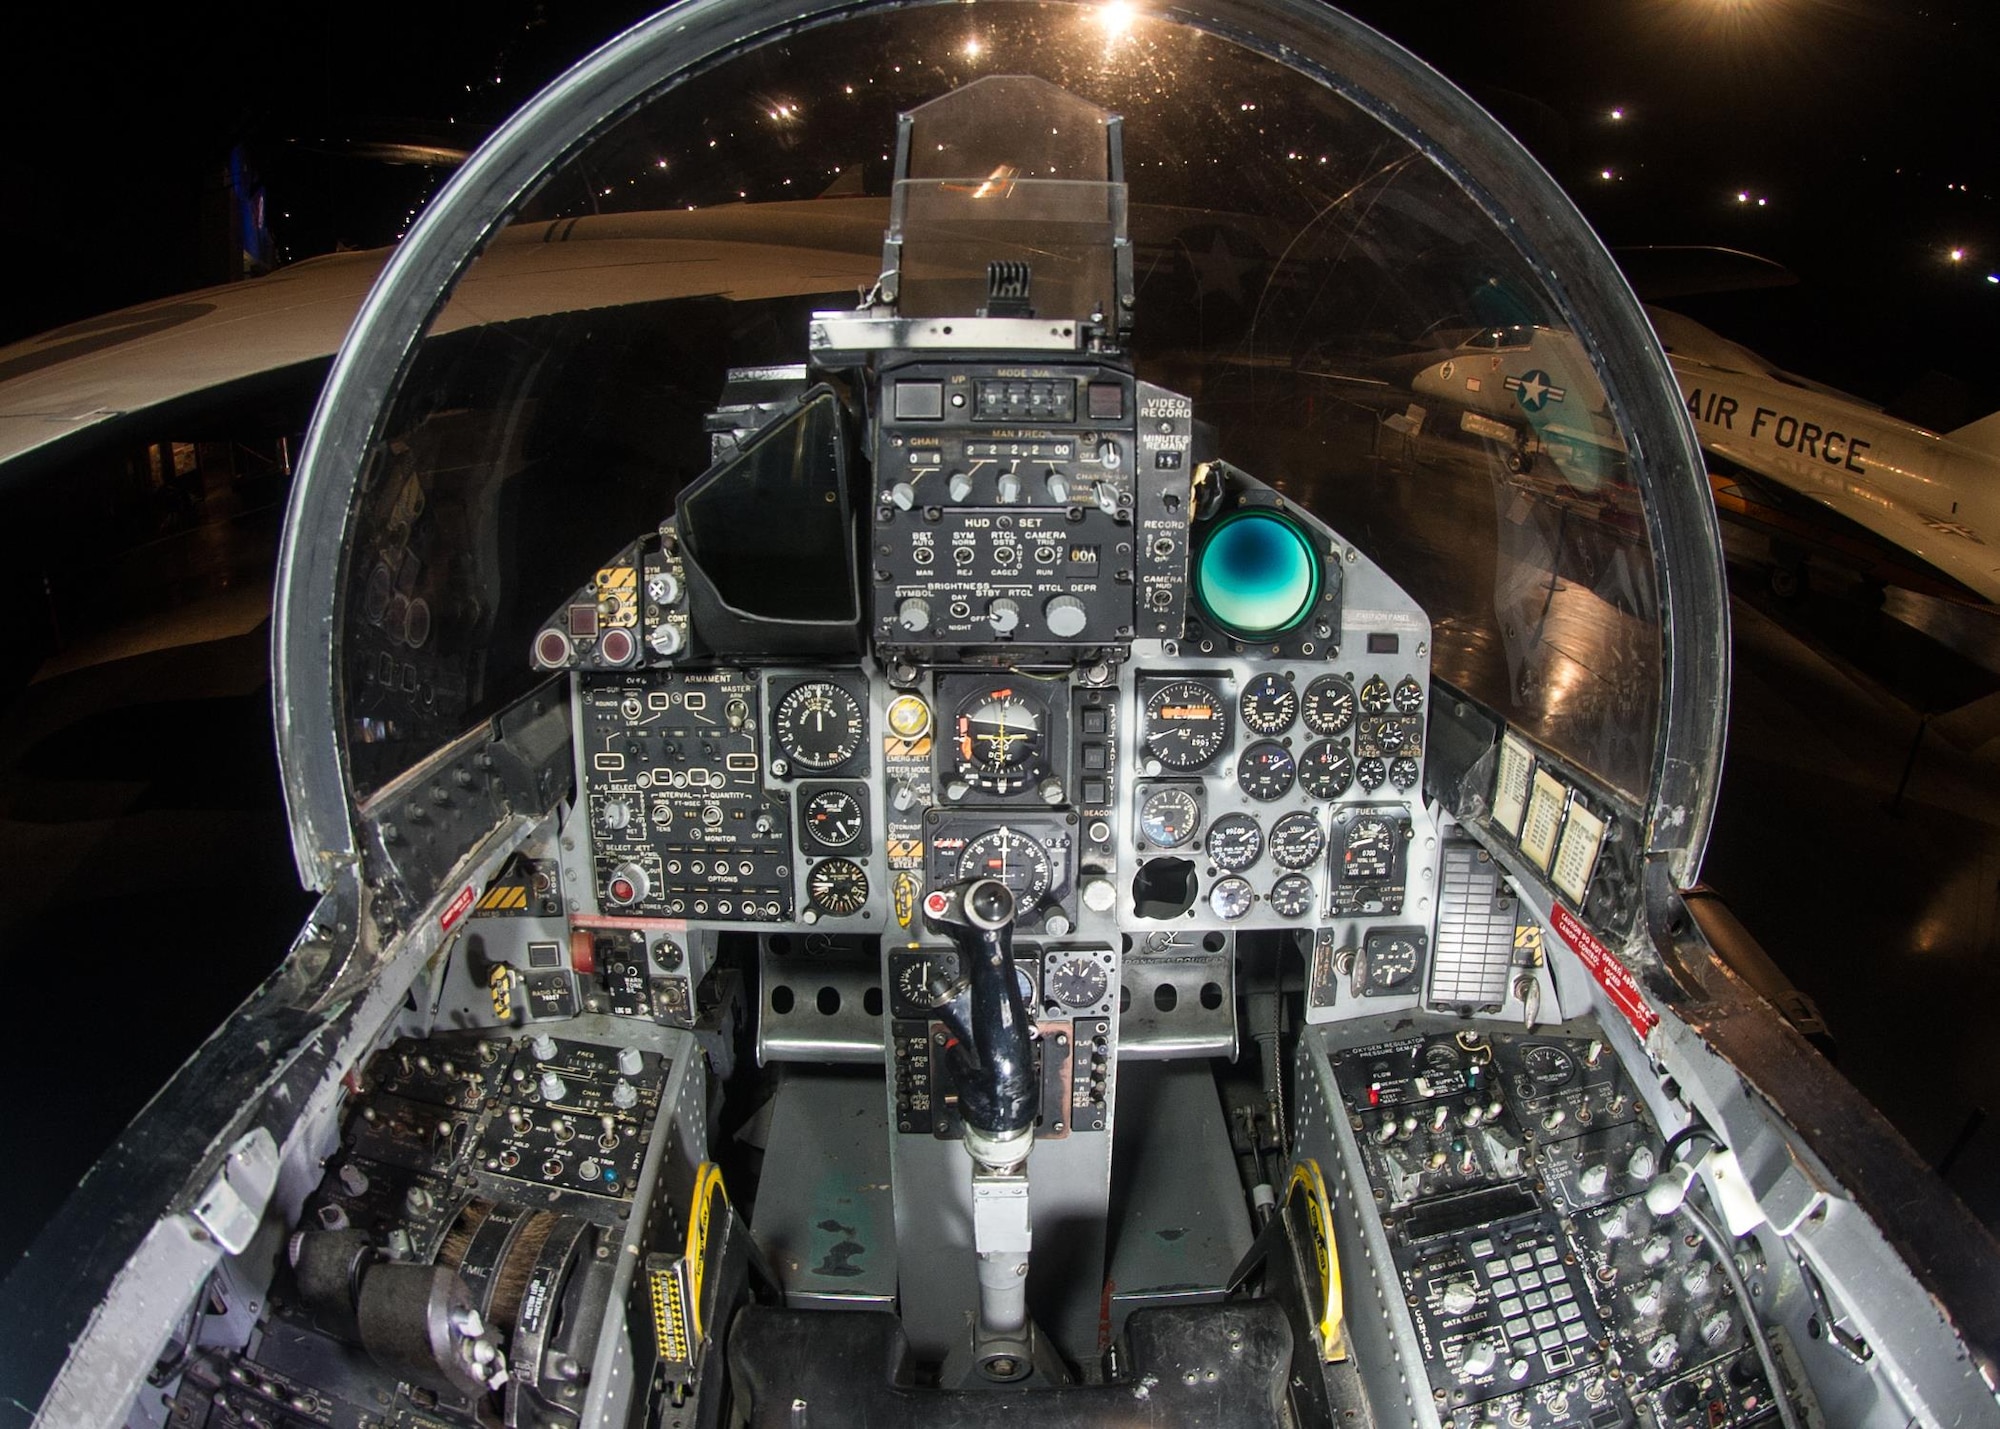 DAYTON, Ohio -- McDonnell Douglas F-15A cockpit in the Cold War Gallery at the National Museum of the United States Air Force. (U.S. Air Force photo by Ken LaRock) 